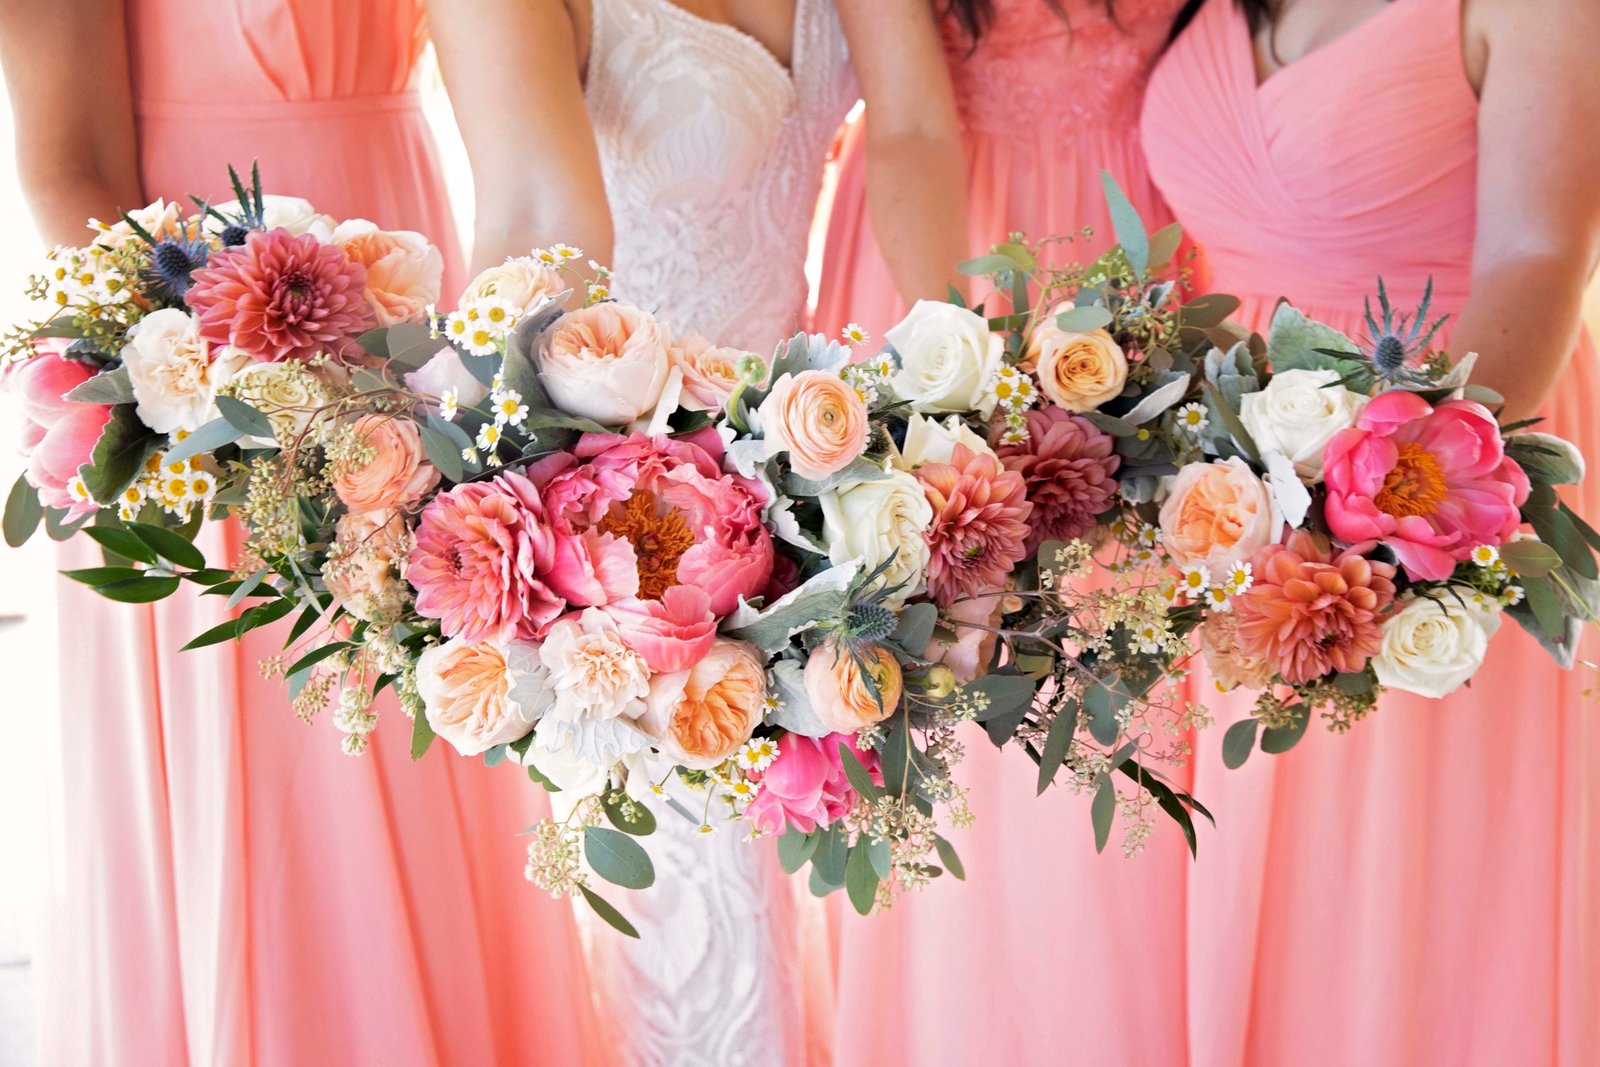 Bridesmaid bouquets in pinks and white